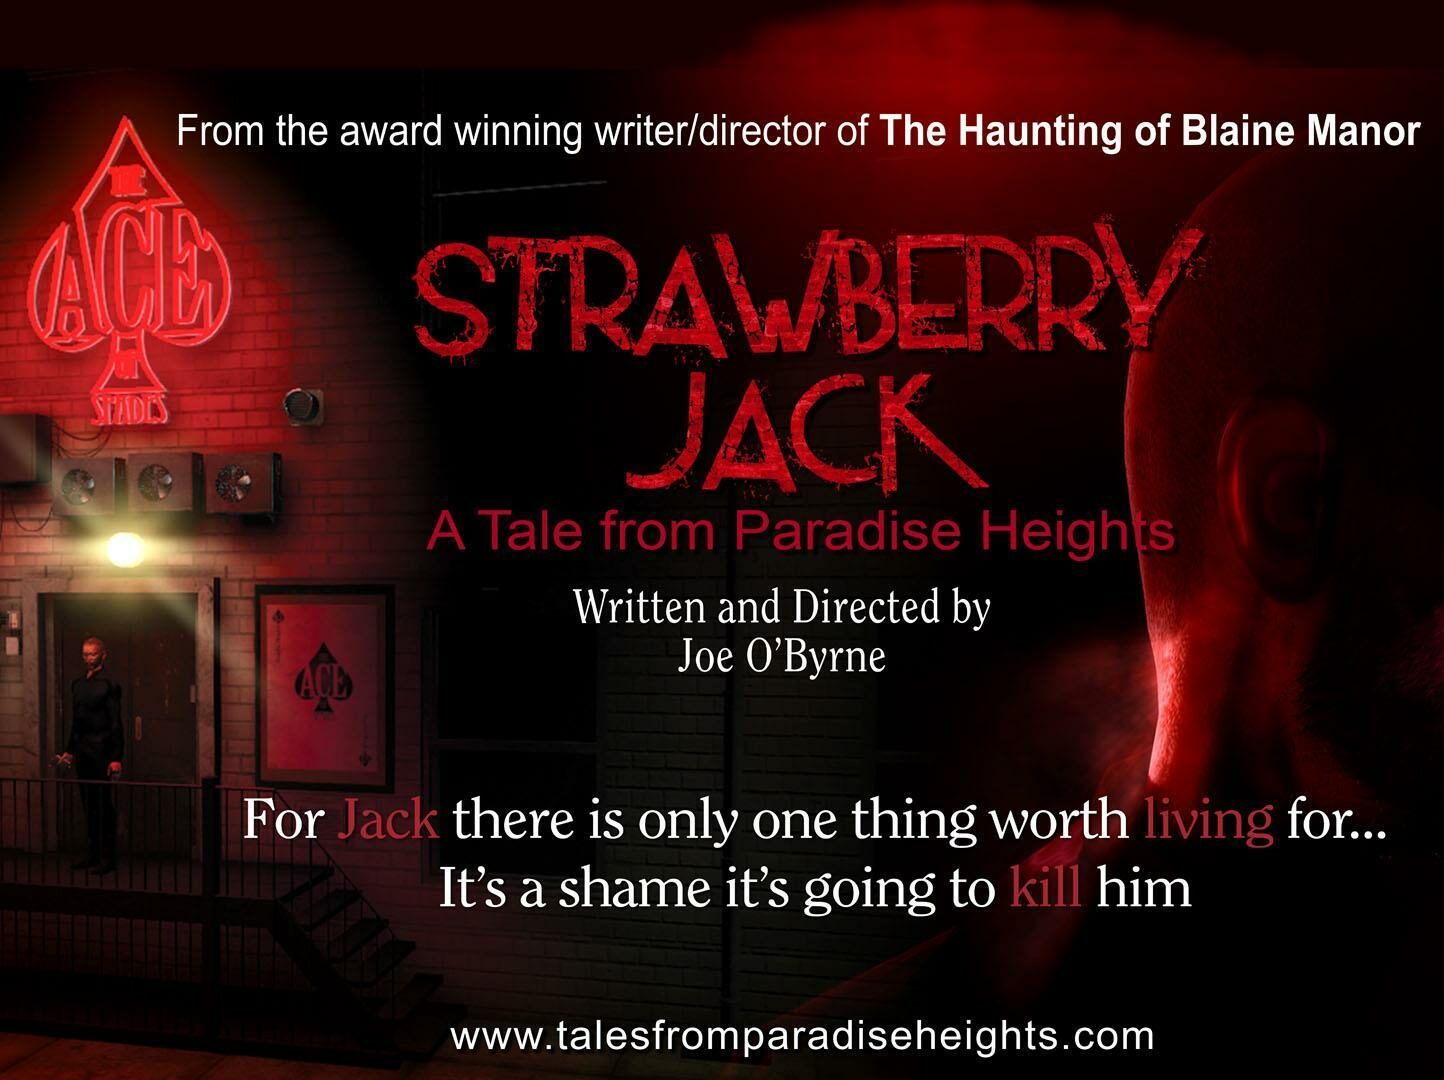 Strawberry Jack – A Tale from Paradise Heights